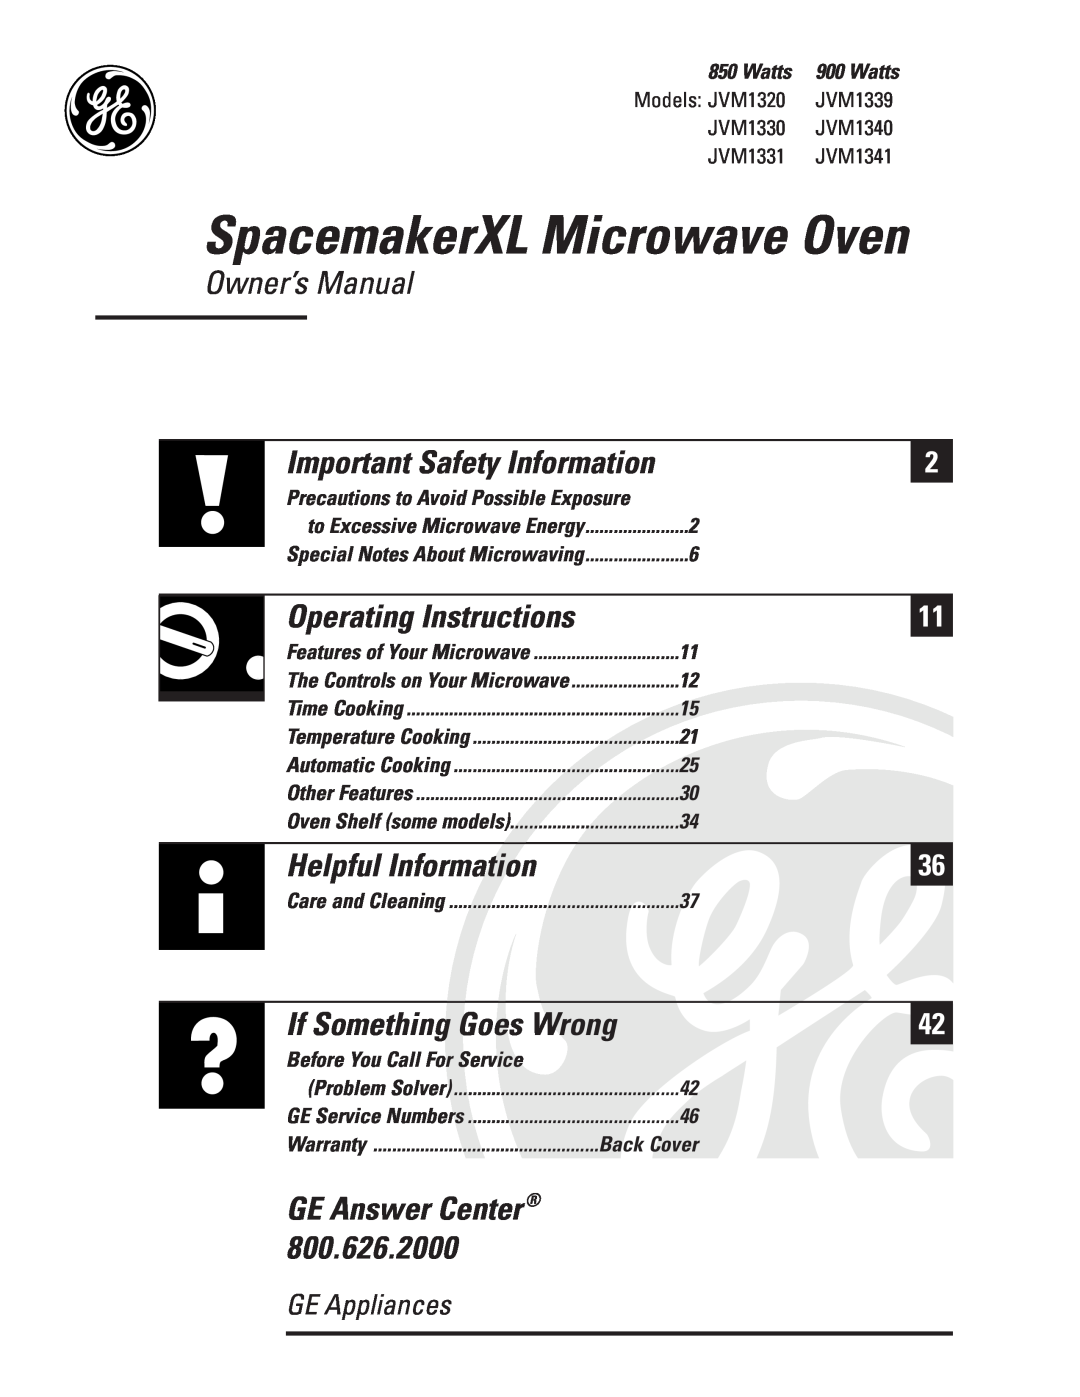 GE JVM1331 warranty Important Safety Information, GE Answer Center, SpacemakerXL Microwave Oven, Operating Instructions 